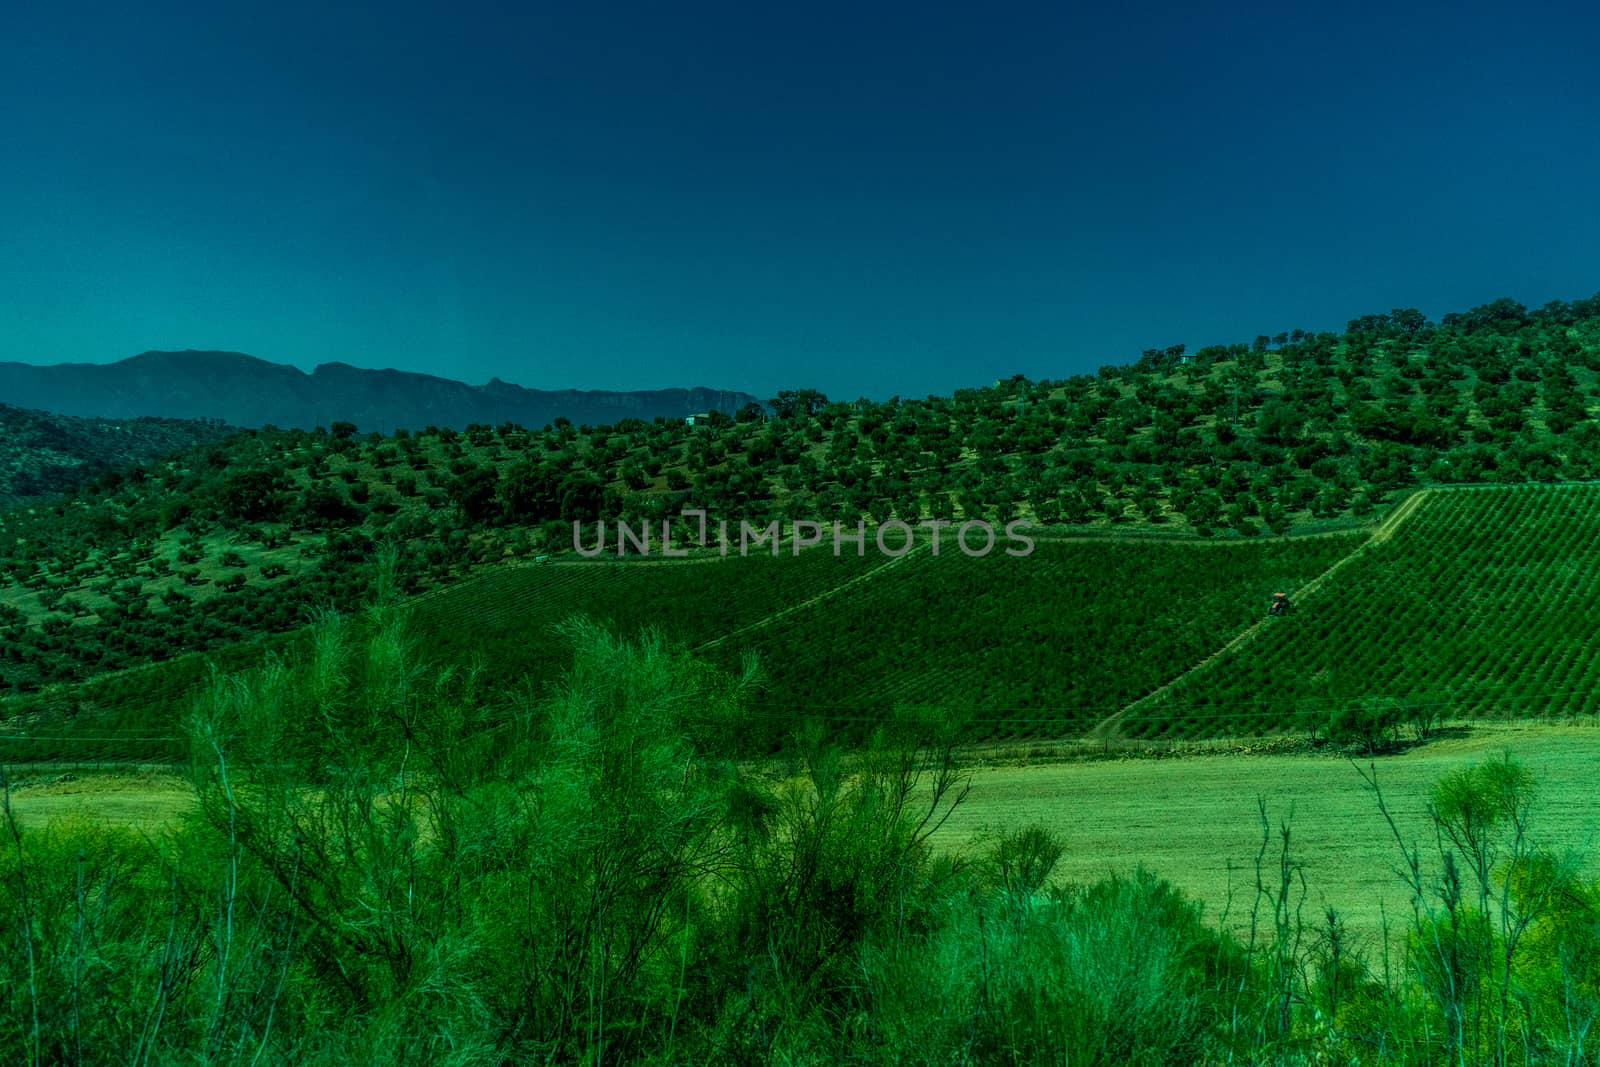 Greenery, Mountains, Farms and Fields on the outskirts of Ronda Spain, Europe on a hot summer day with clear blue skies